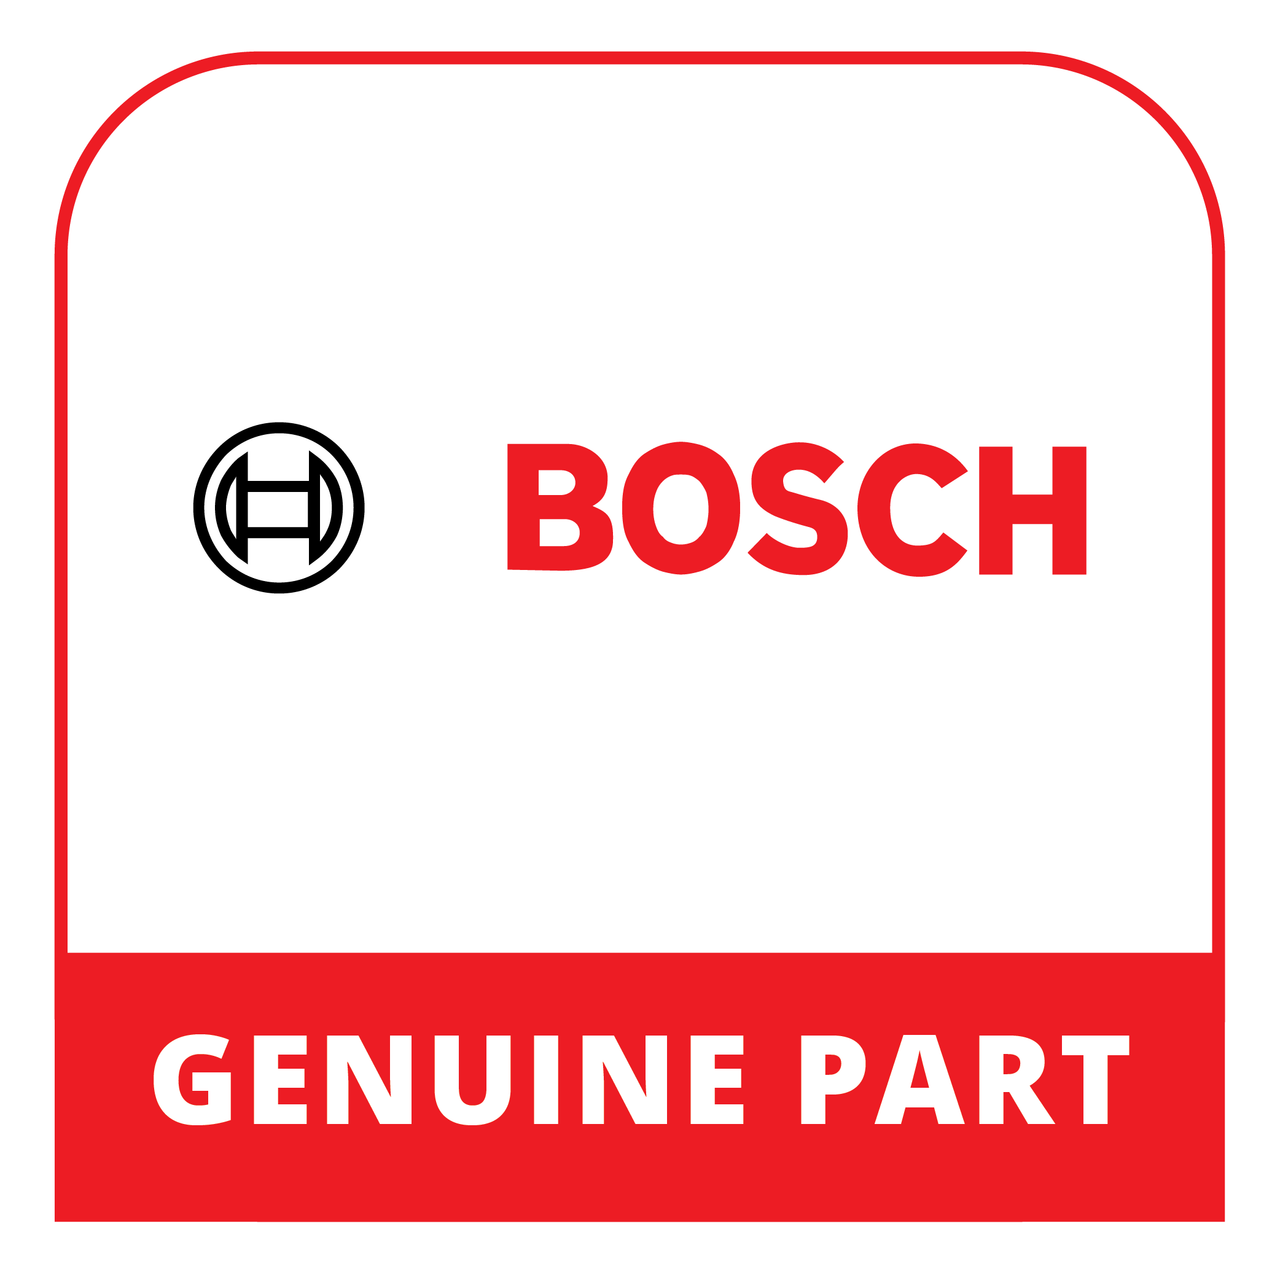 Bosch (Thermador) 11024783 - Sealing - Genuine Bosch (Thermador) Part